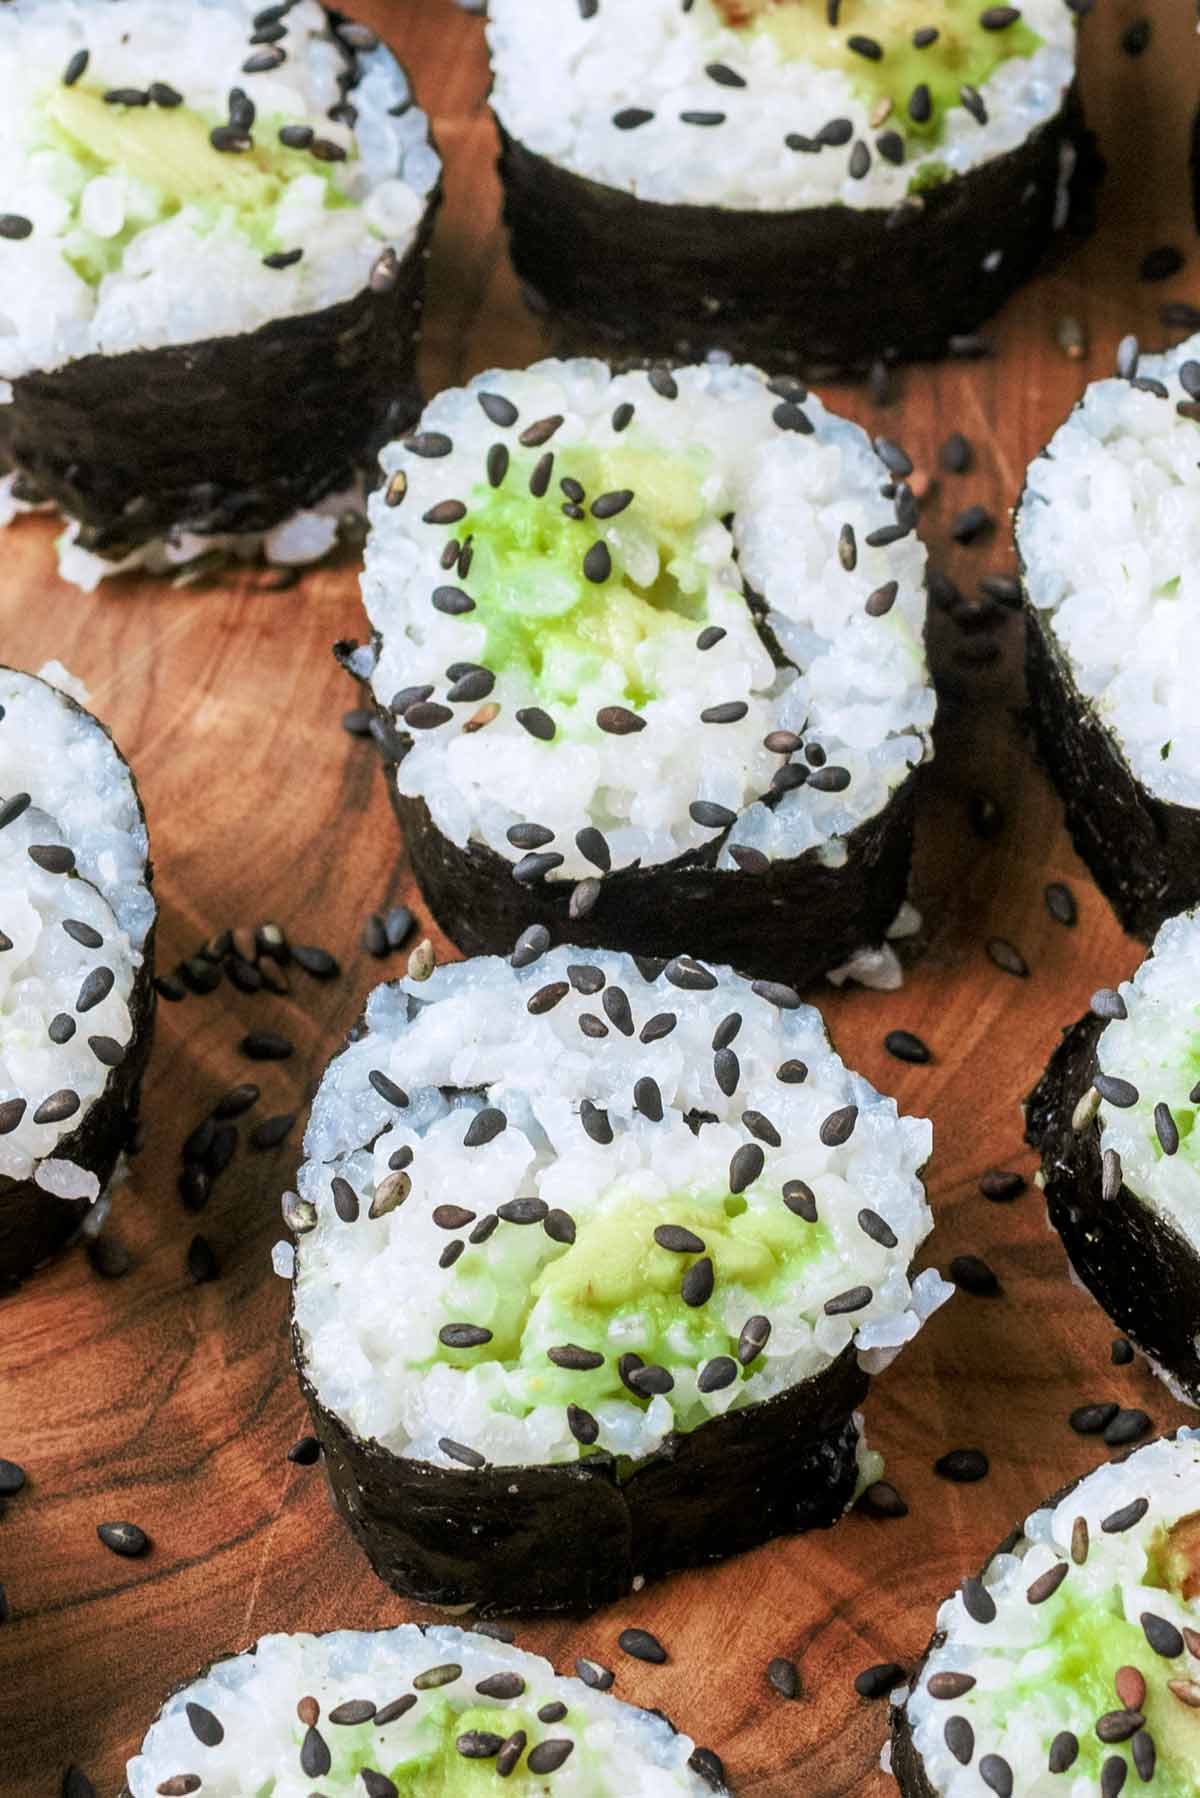 Two sushi maki with avocado fillings.